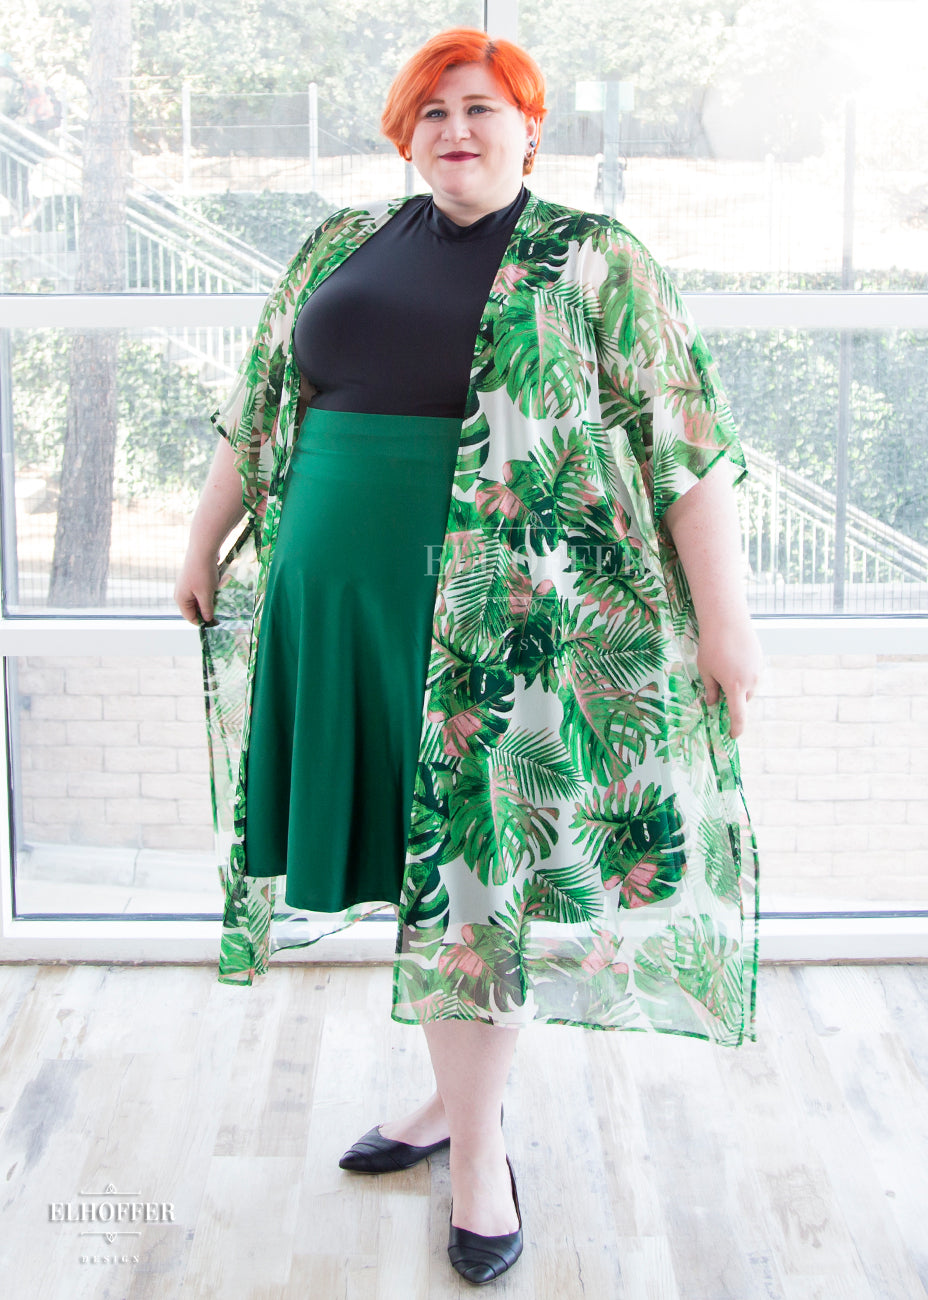 Logan, a fair skinned 3XL model with short bright orange hair, is wearing the open front sheer cover up. The cover up has a pattern of green tropical leaves with pink spots on a white background.